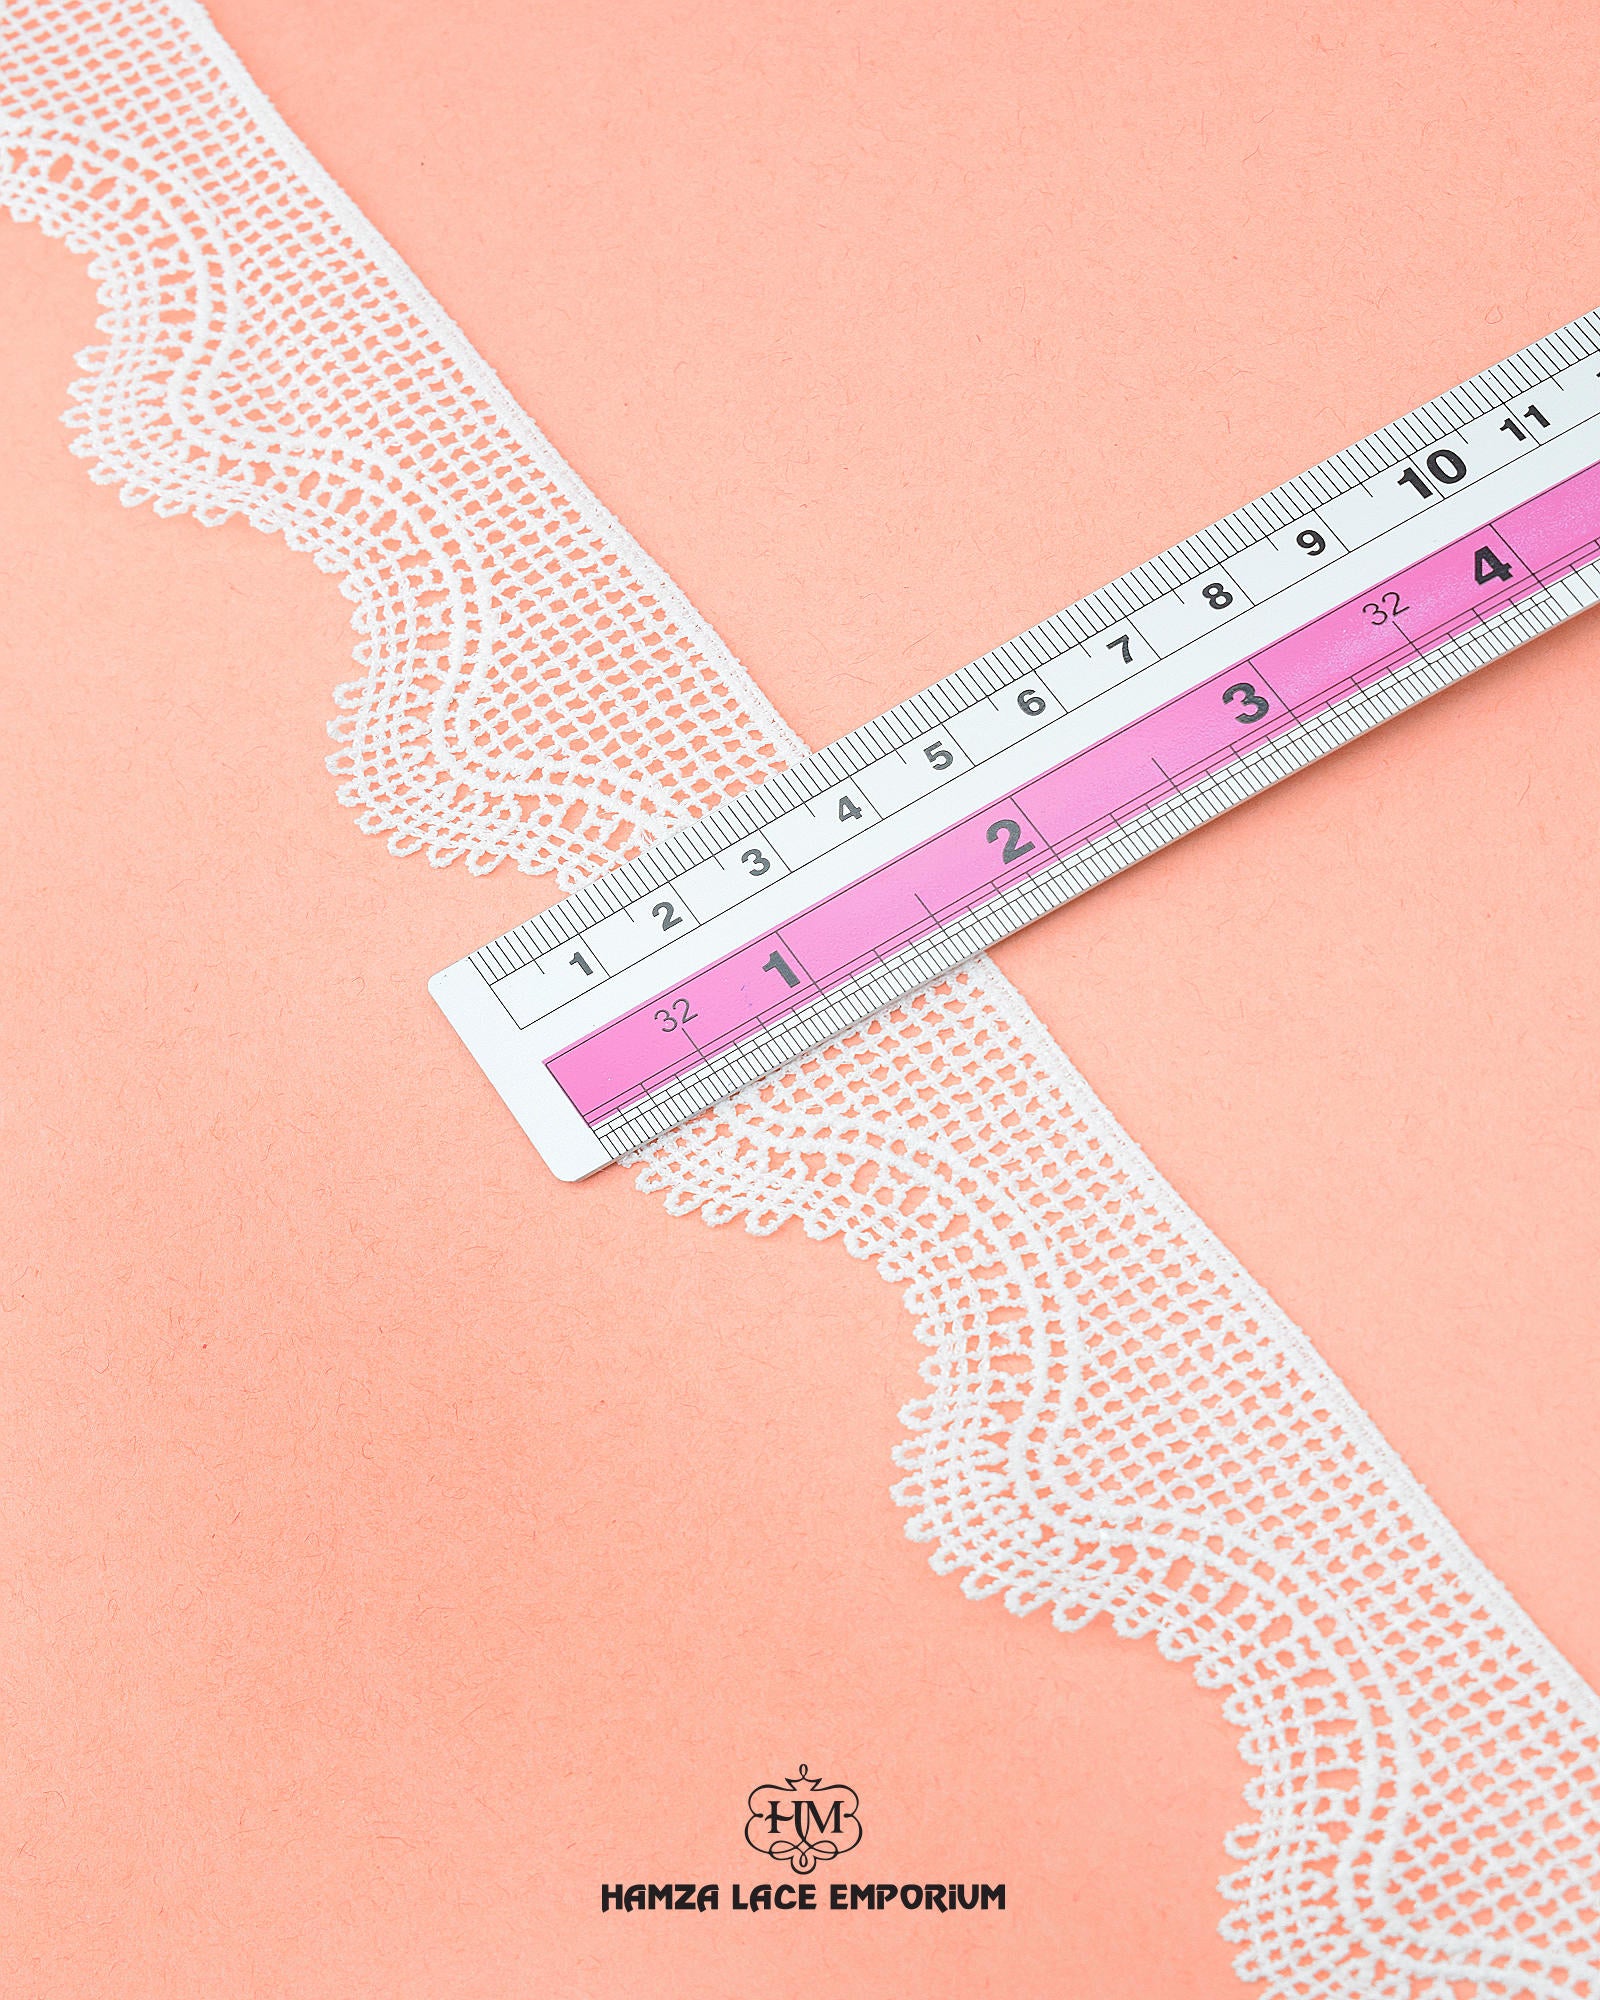 Size of the 'Edging Scallop Lace 22855' is shown as '1.25' inches with the help of a ruler